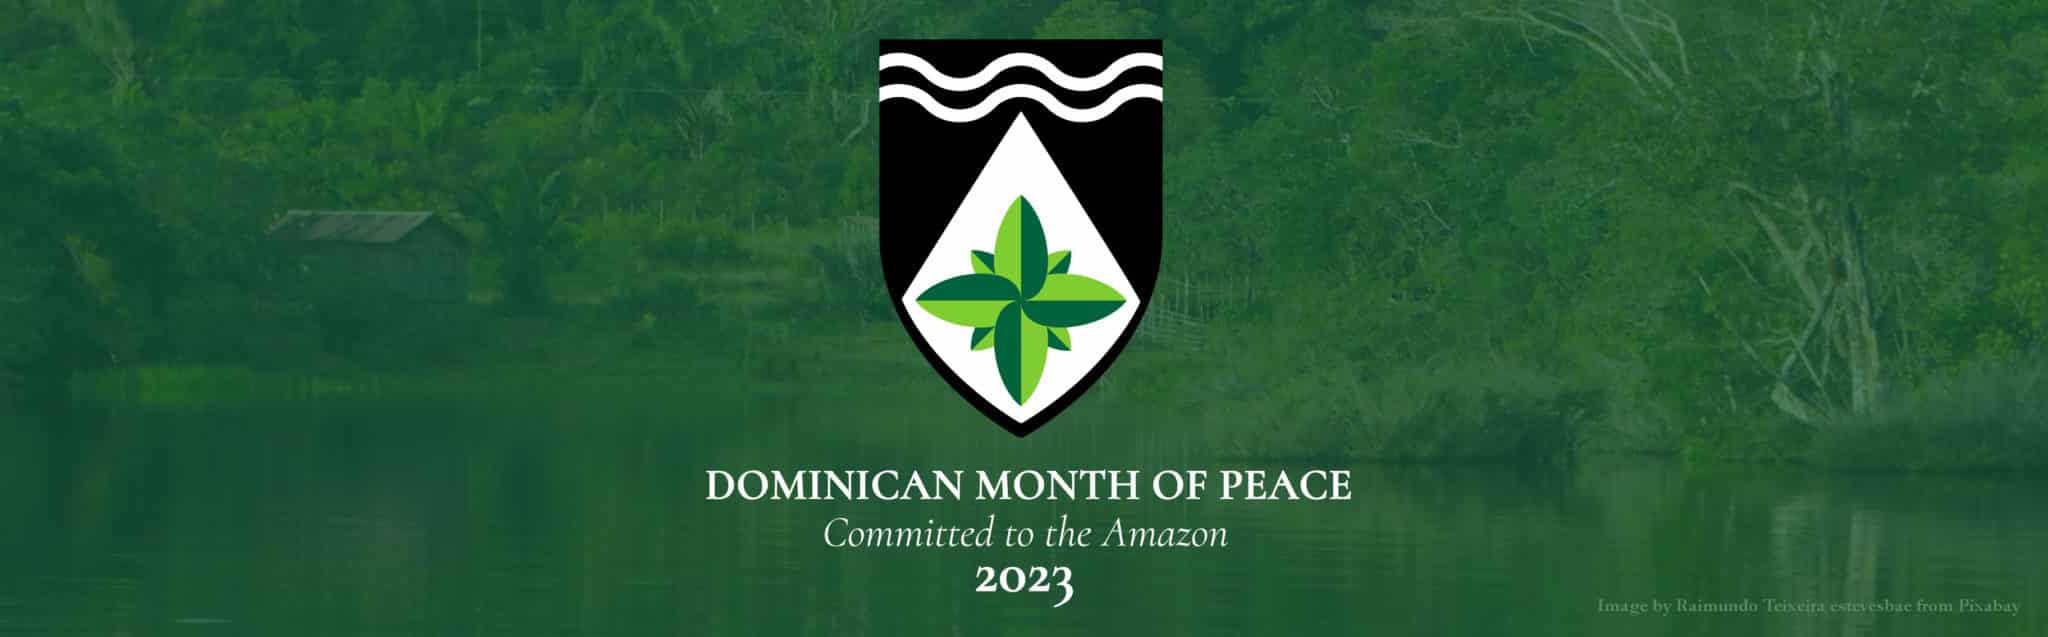 Dominican Month of Peace Banner